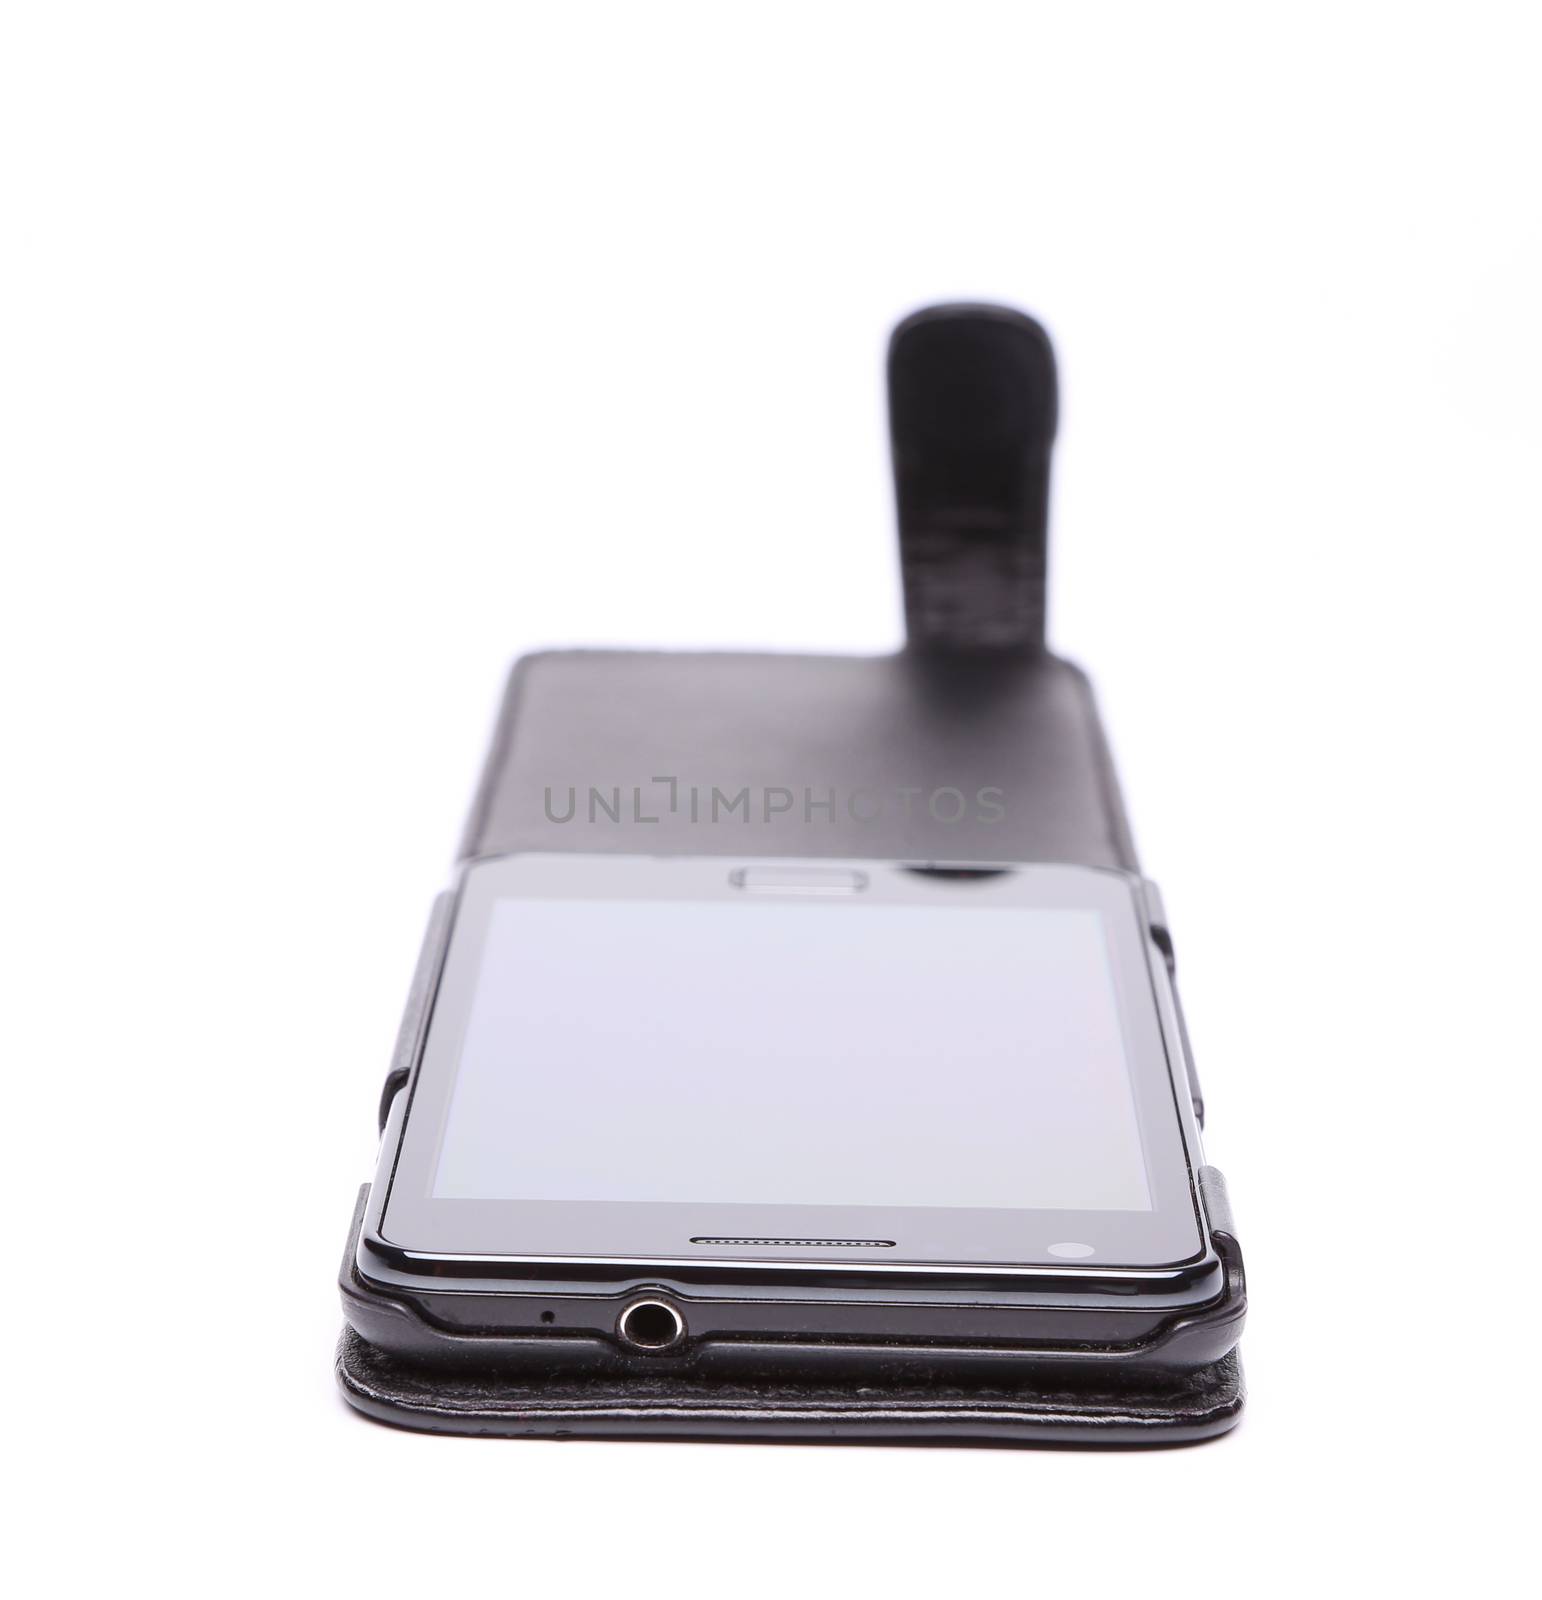 Mobile phone in its case over white background